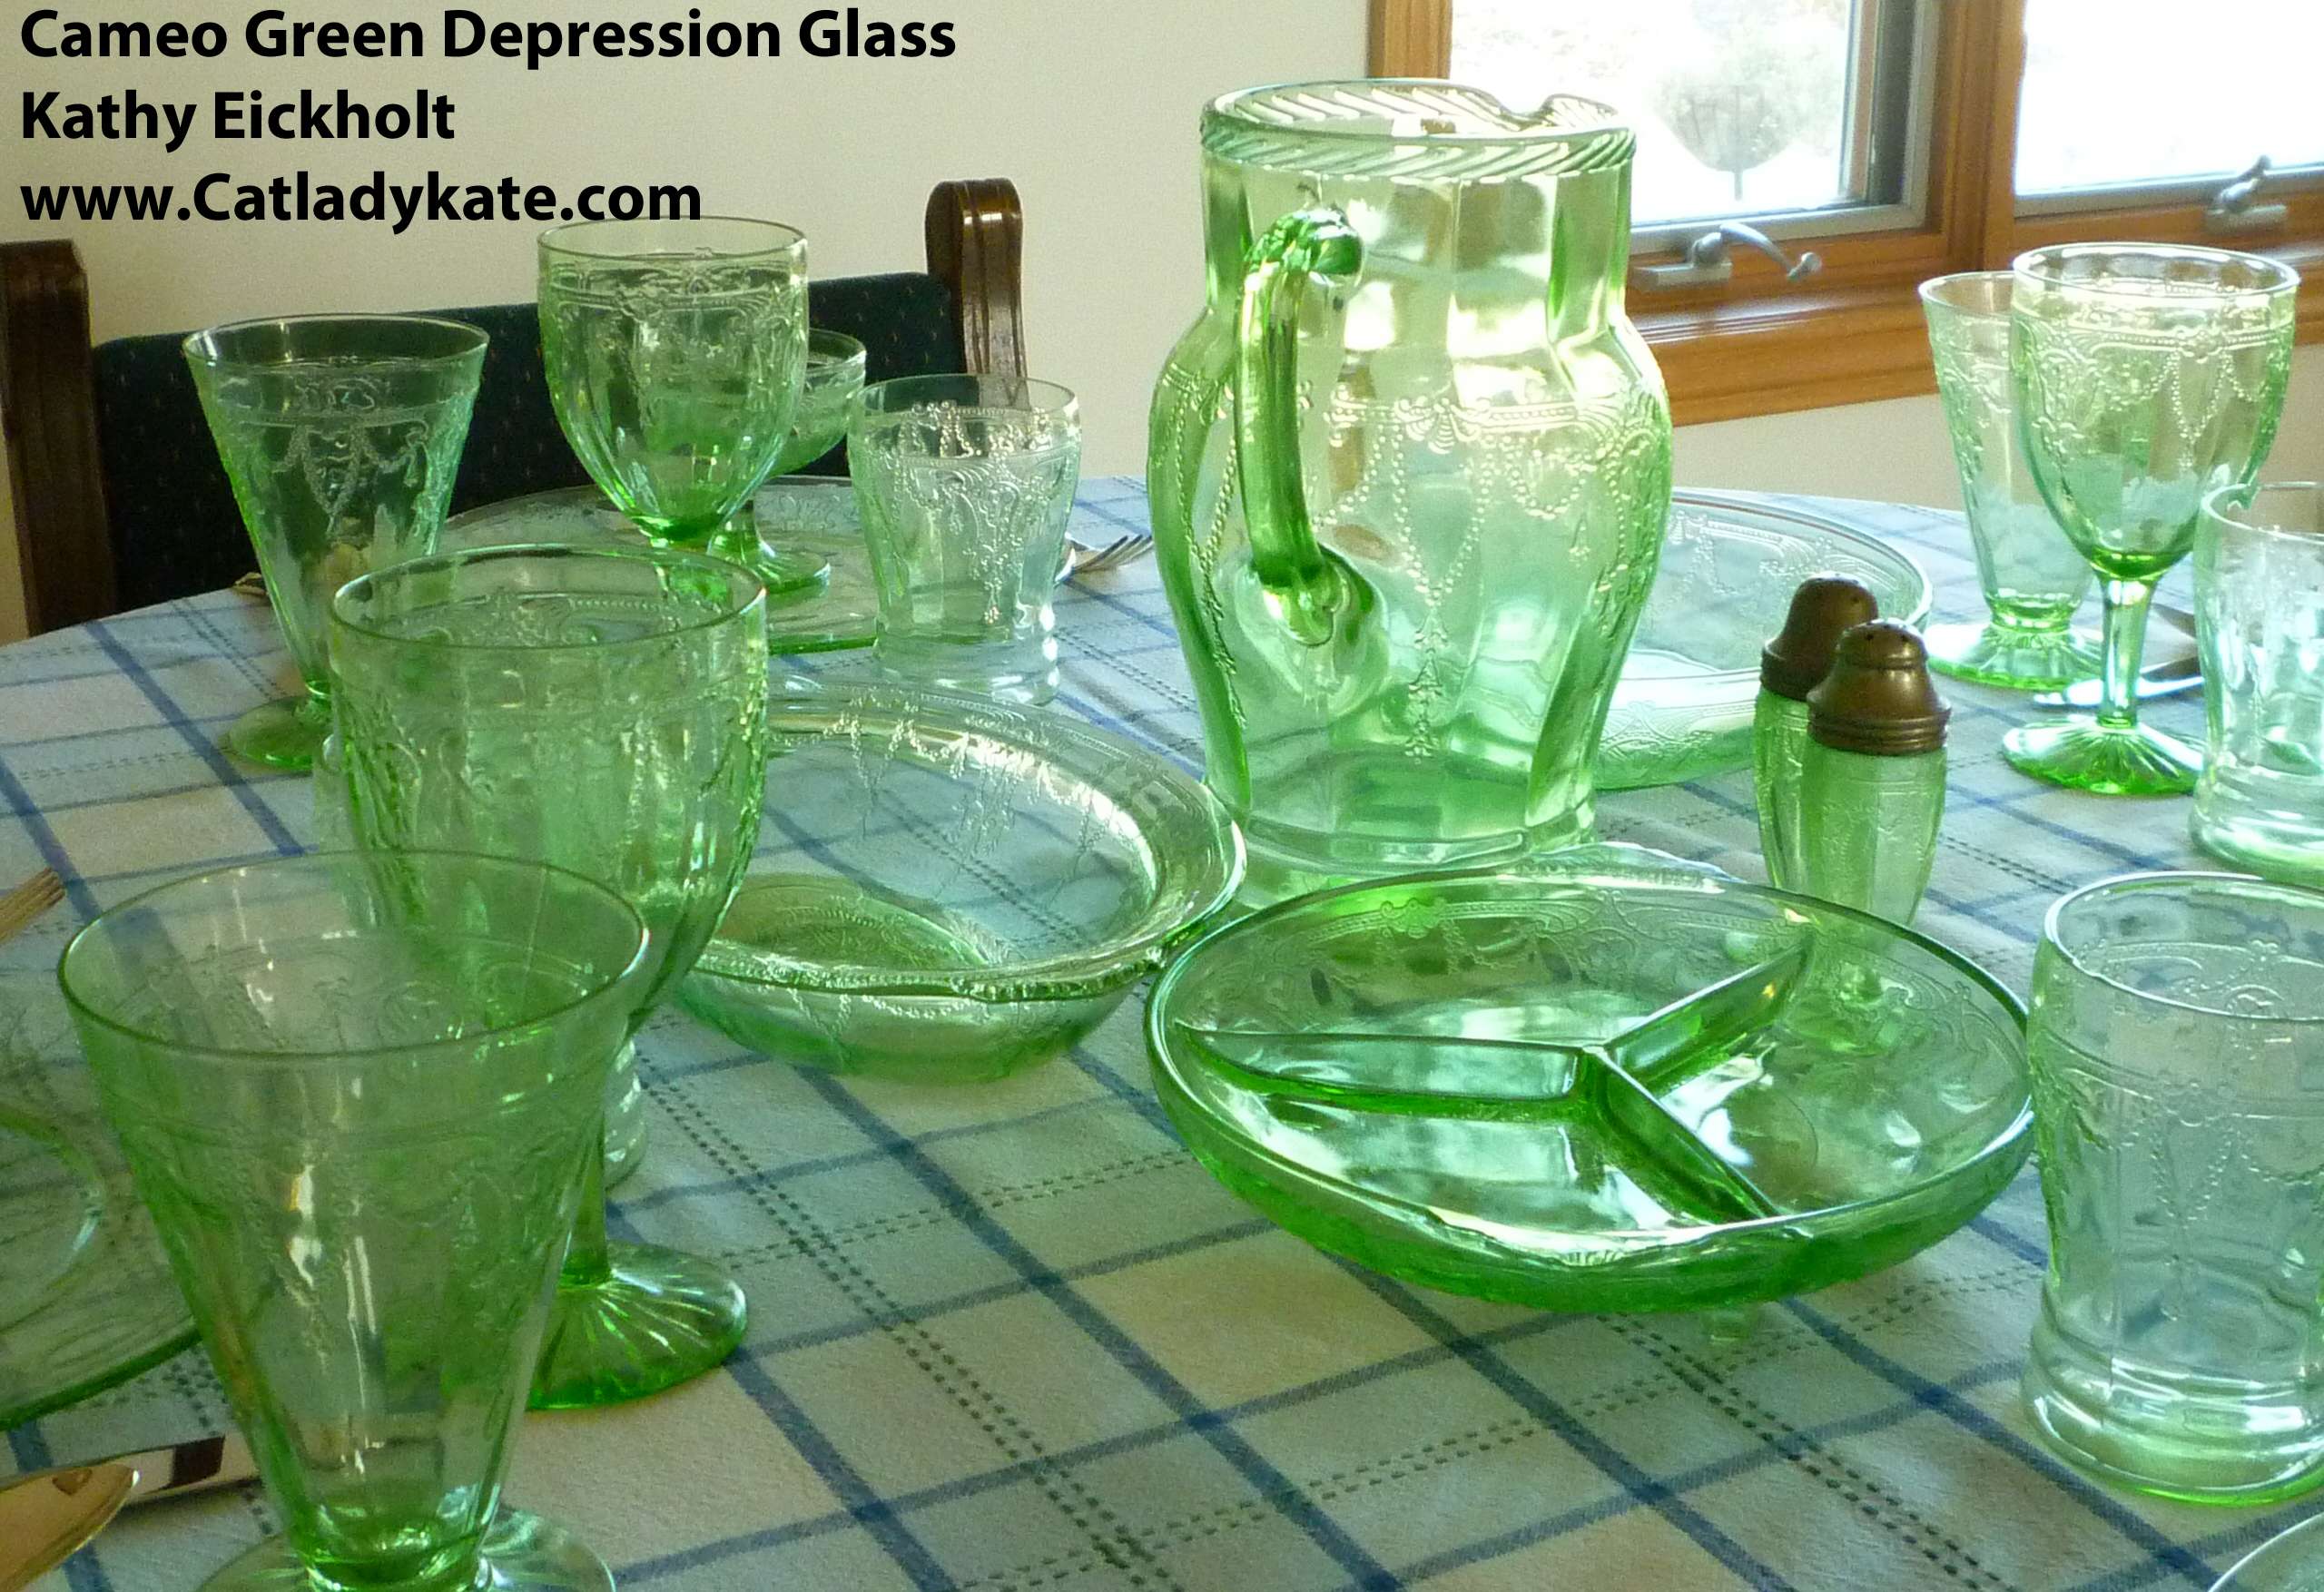 Collecting Cameo Depression Glass.